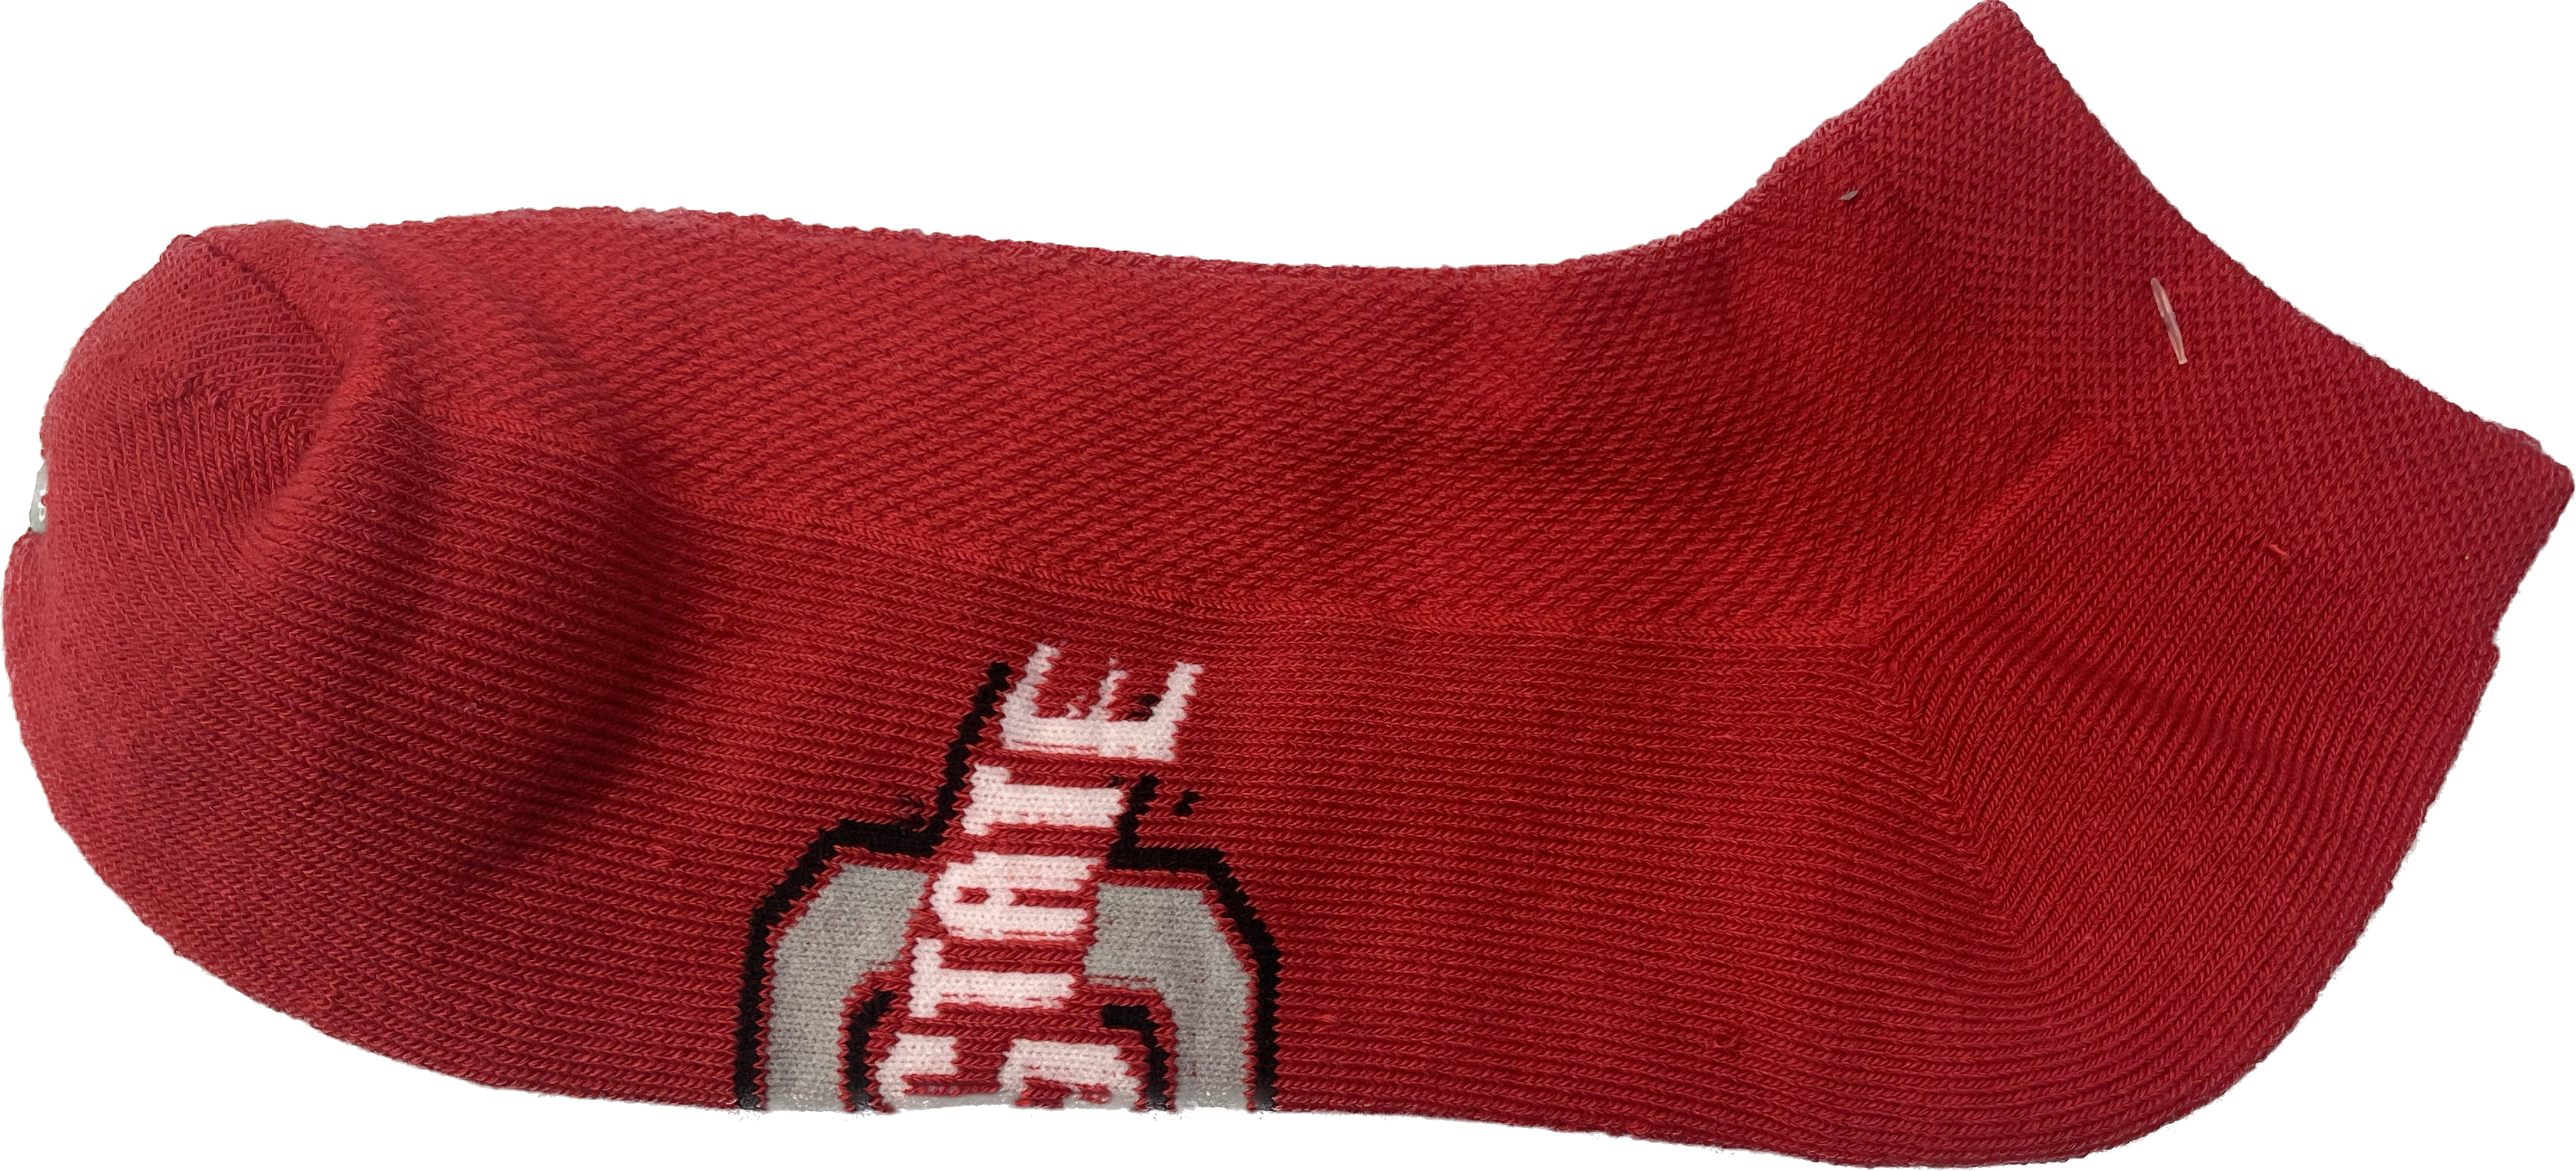 red footed sock with ohio state logo